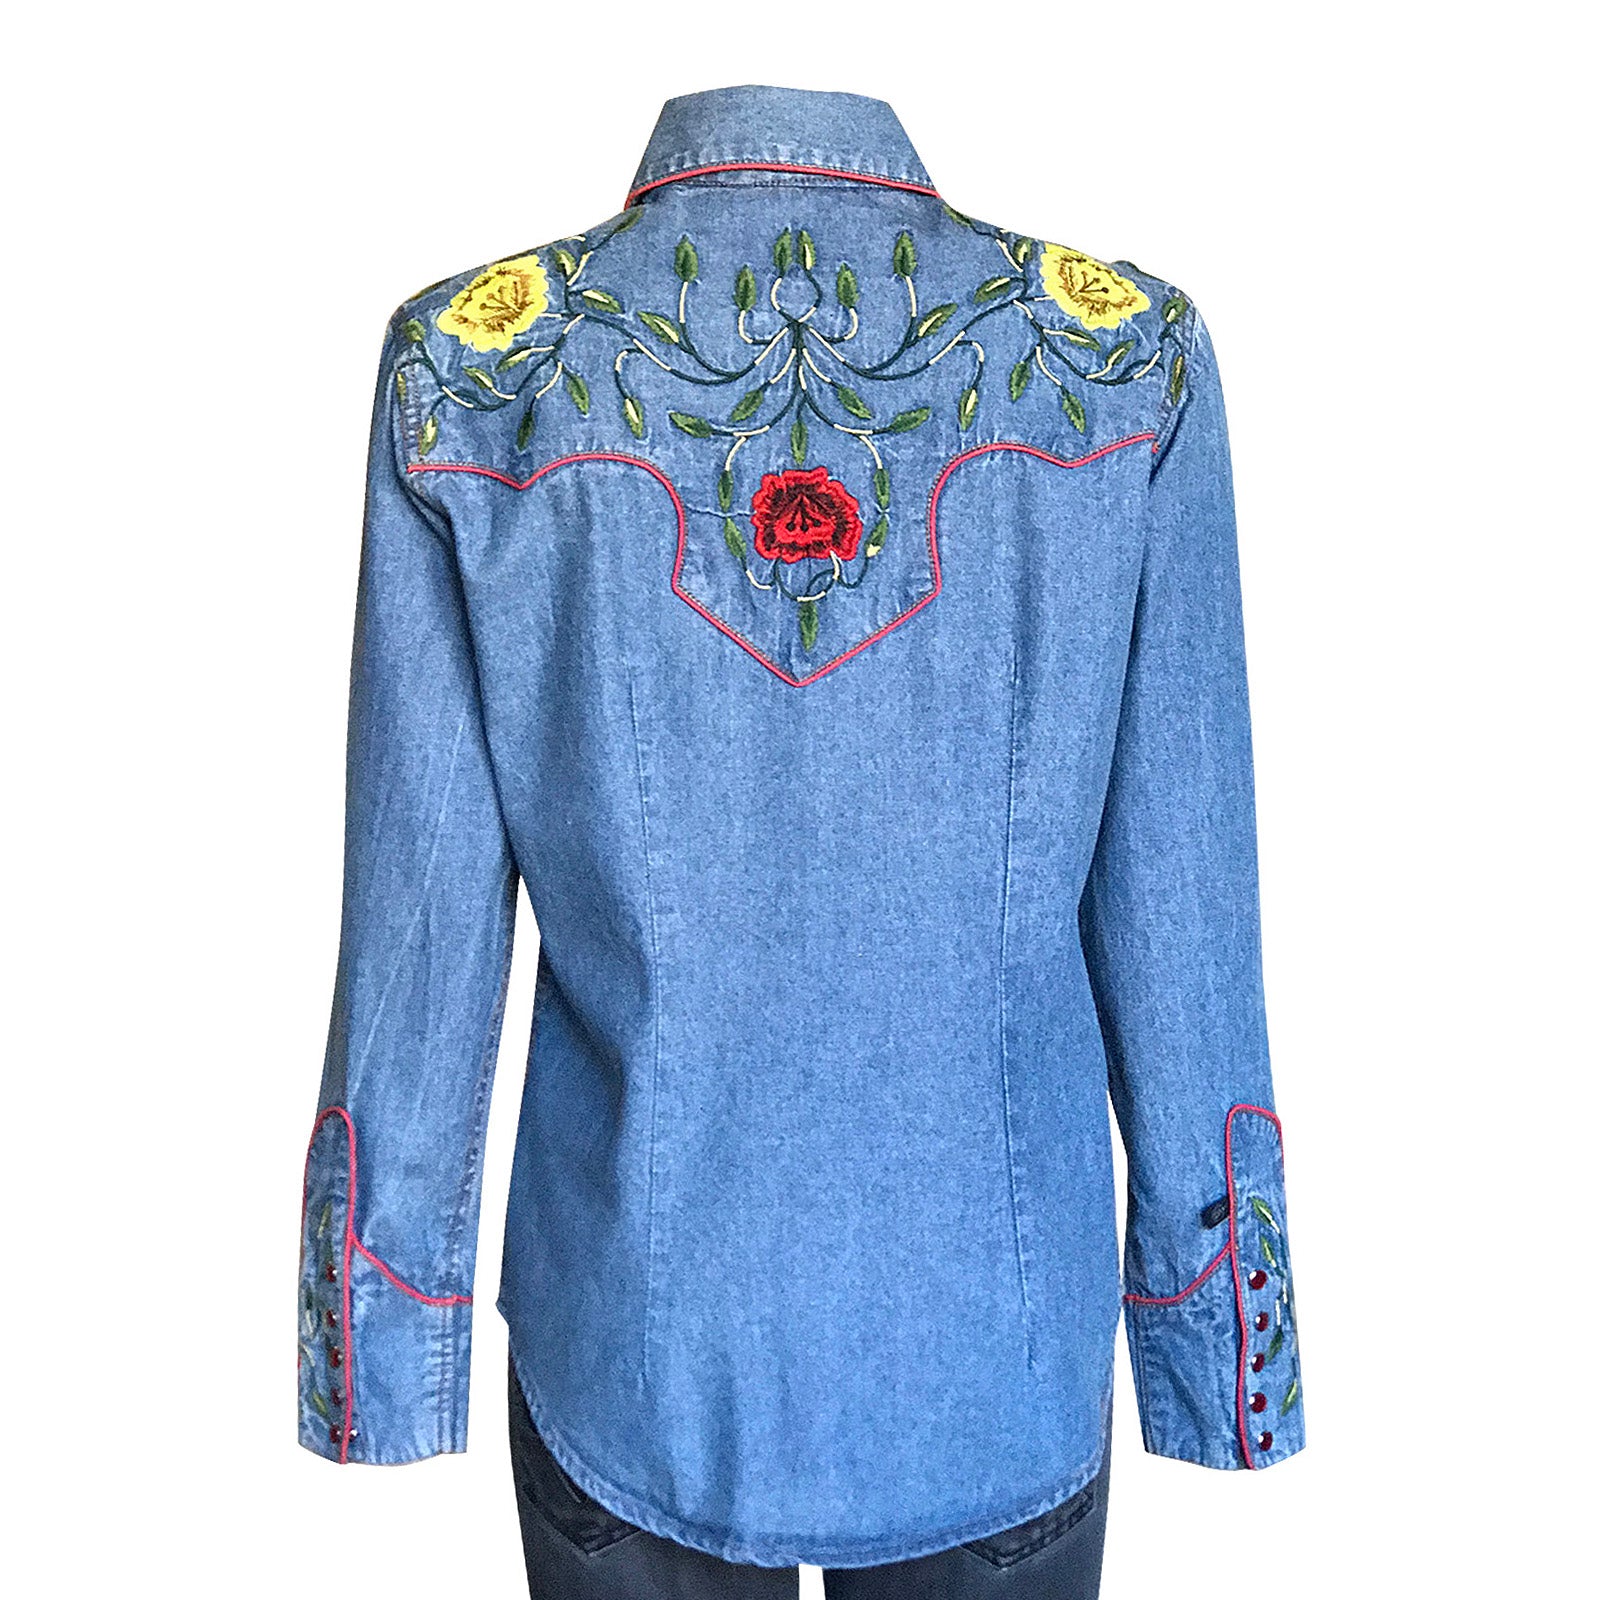 Vintage Northern Reflections Embroidered Denim Shirt, Retro Button Down  Jean Shirt Size Small -  Canada